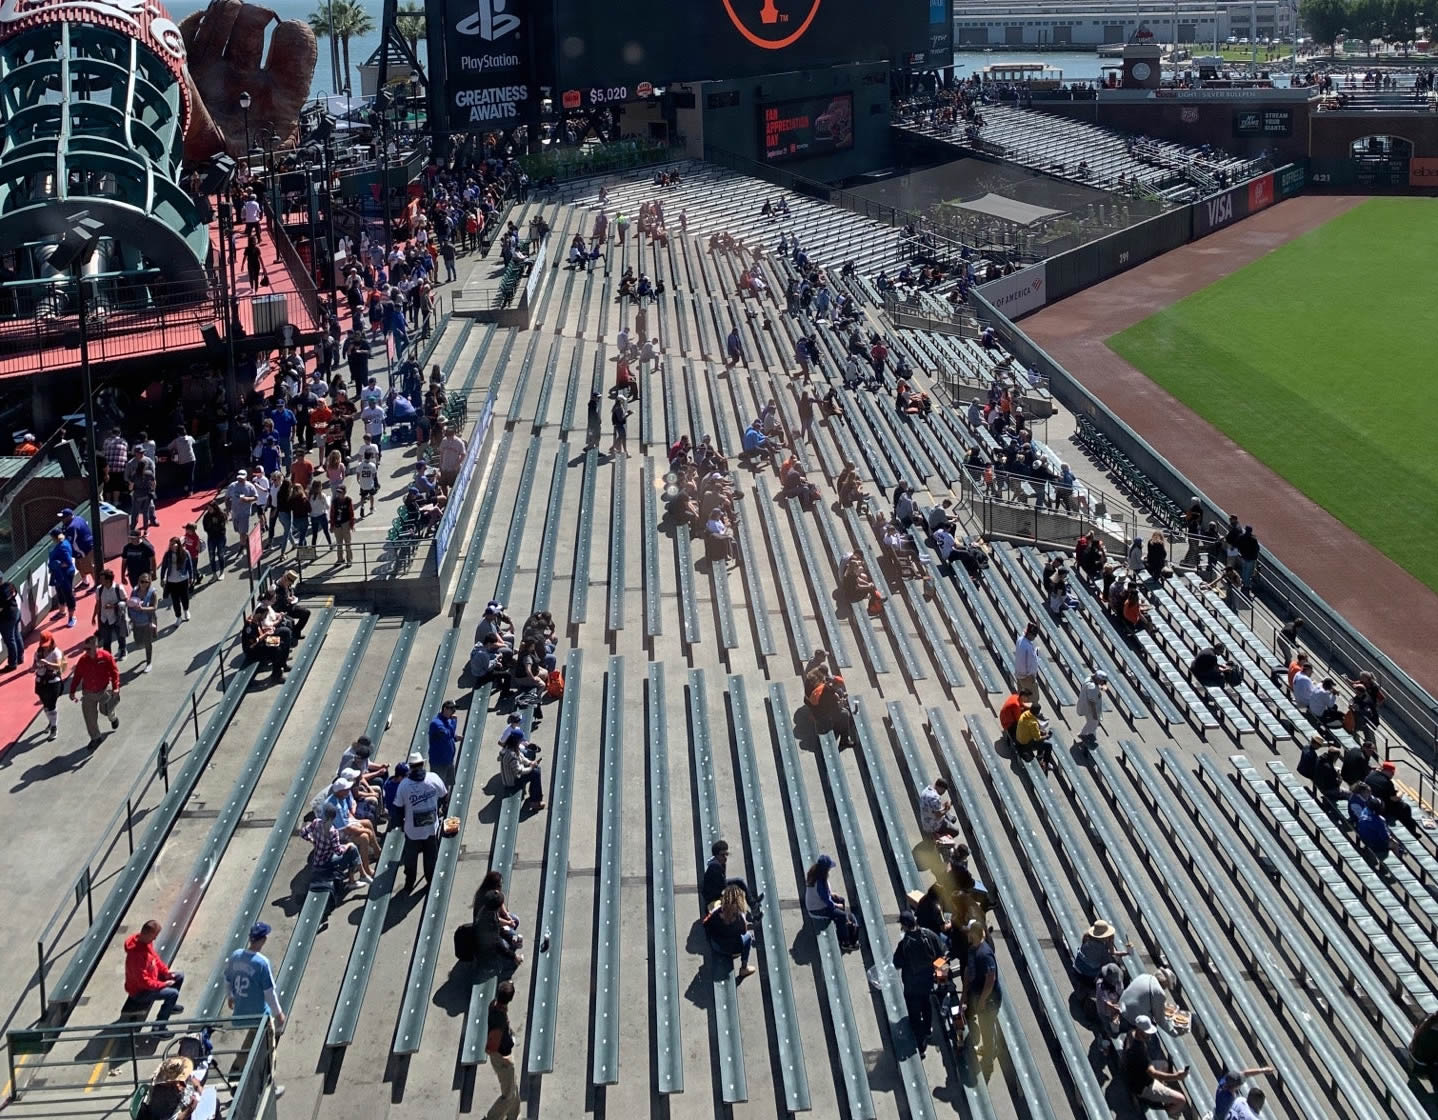 SF Giants: Oracle Park's new dimensions get first test